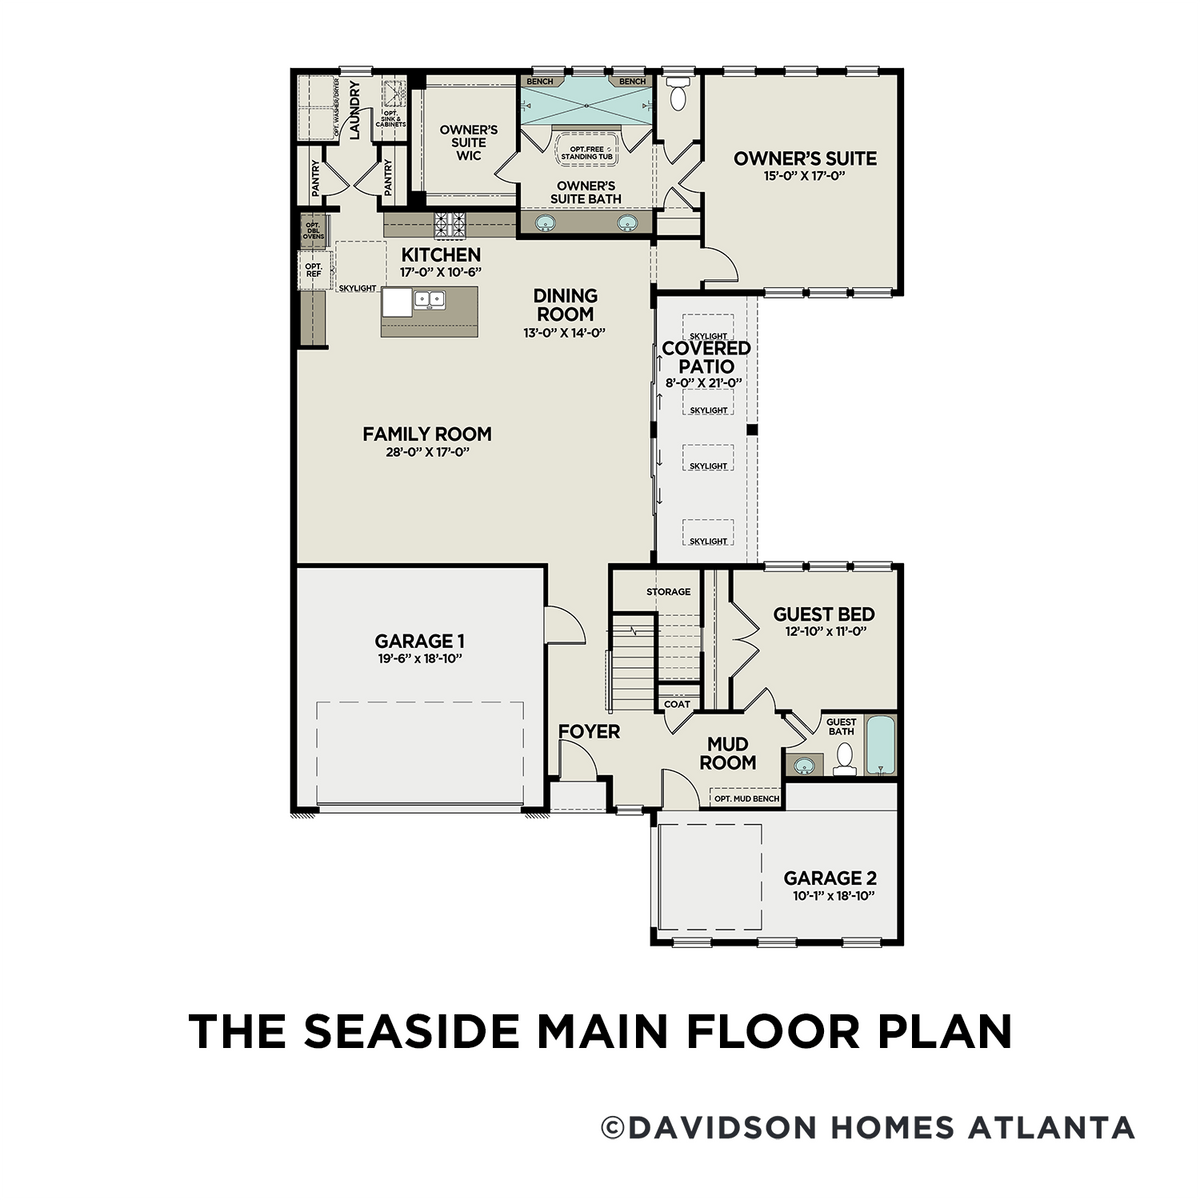 1 - The Seaside A buildable floor plan layout in Davidson Homes' The Village at Towne Lake community.